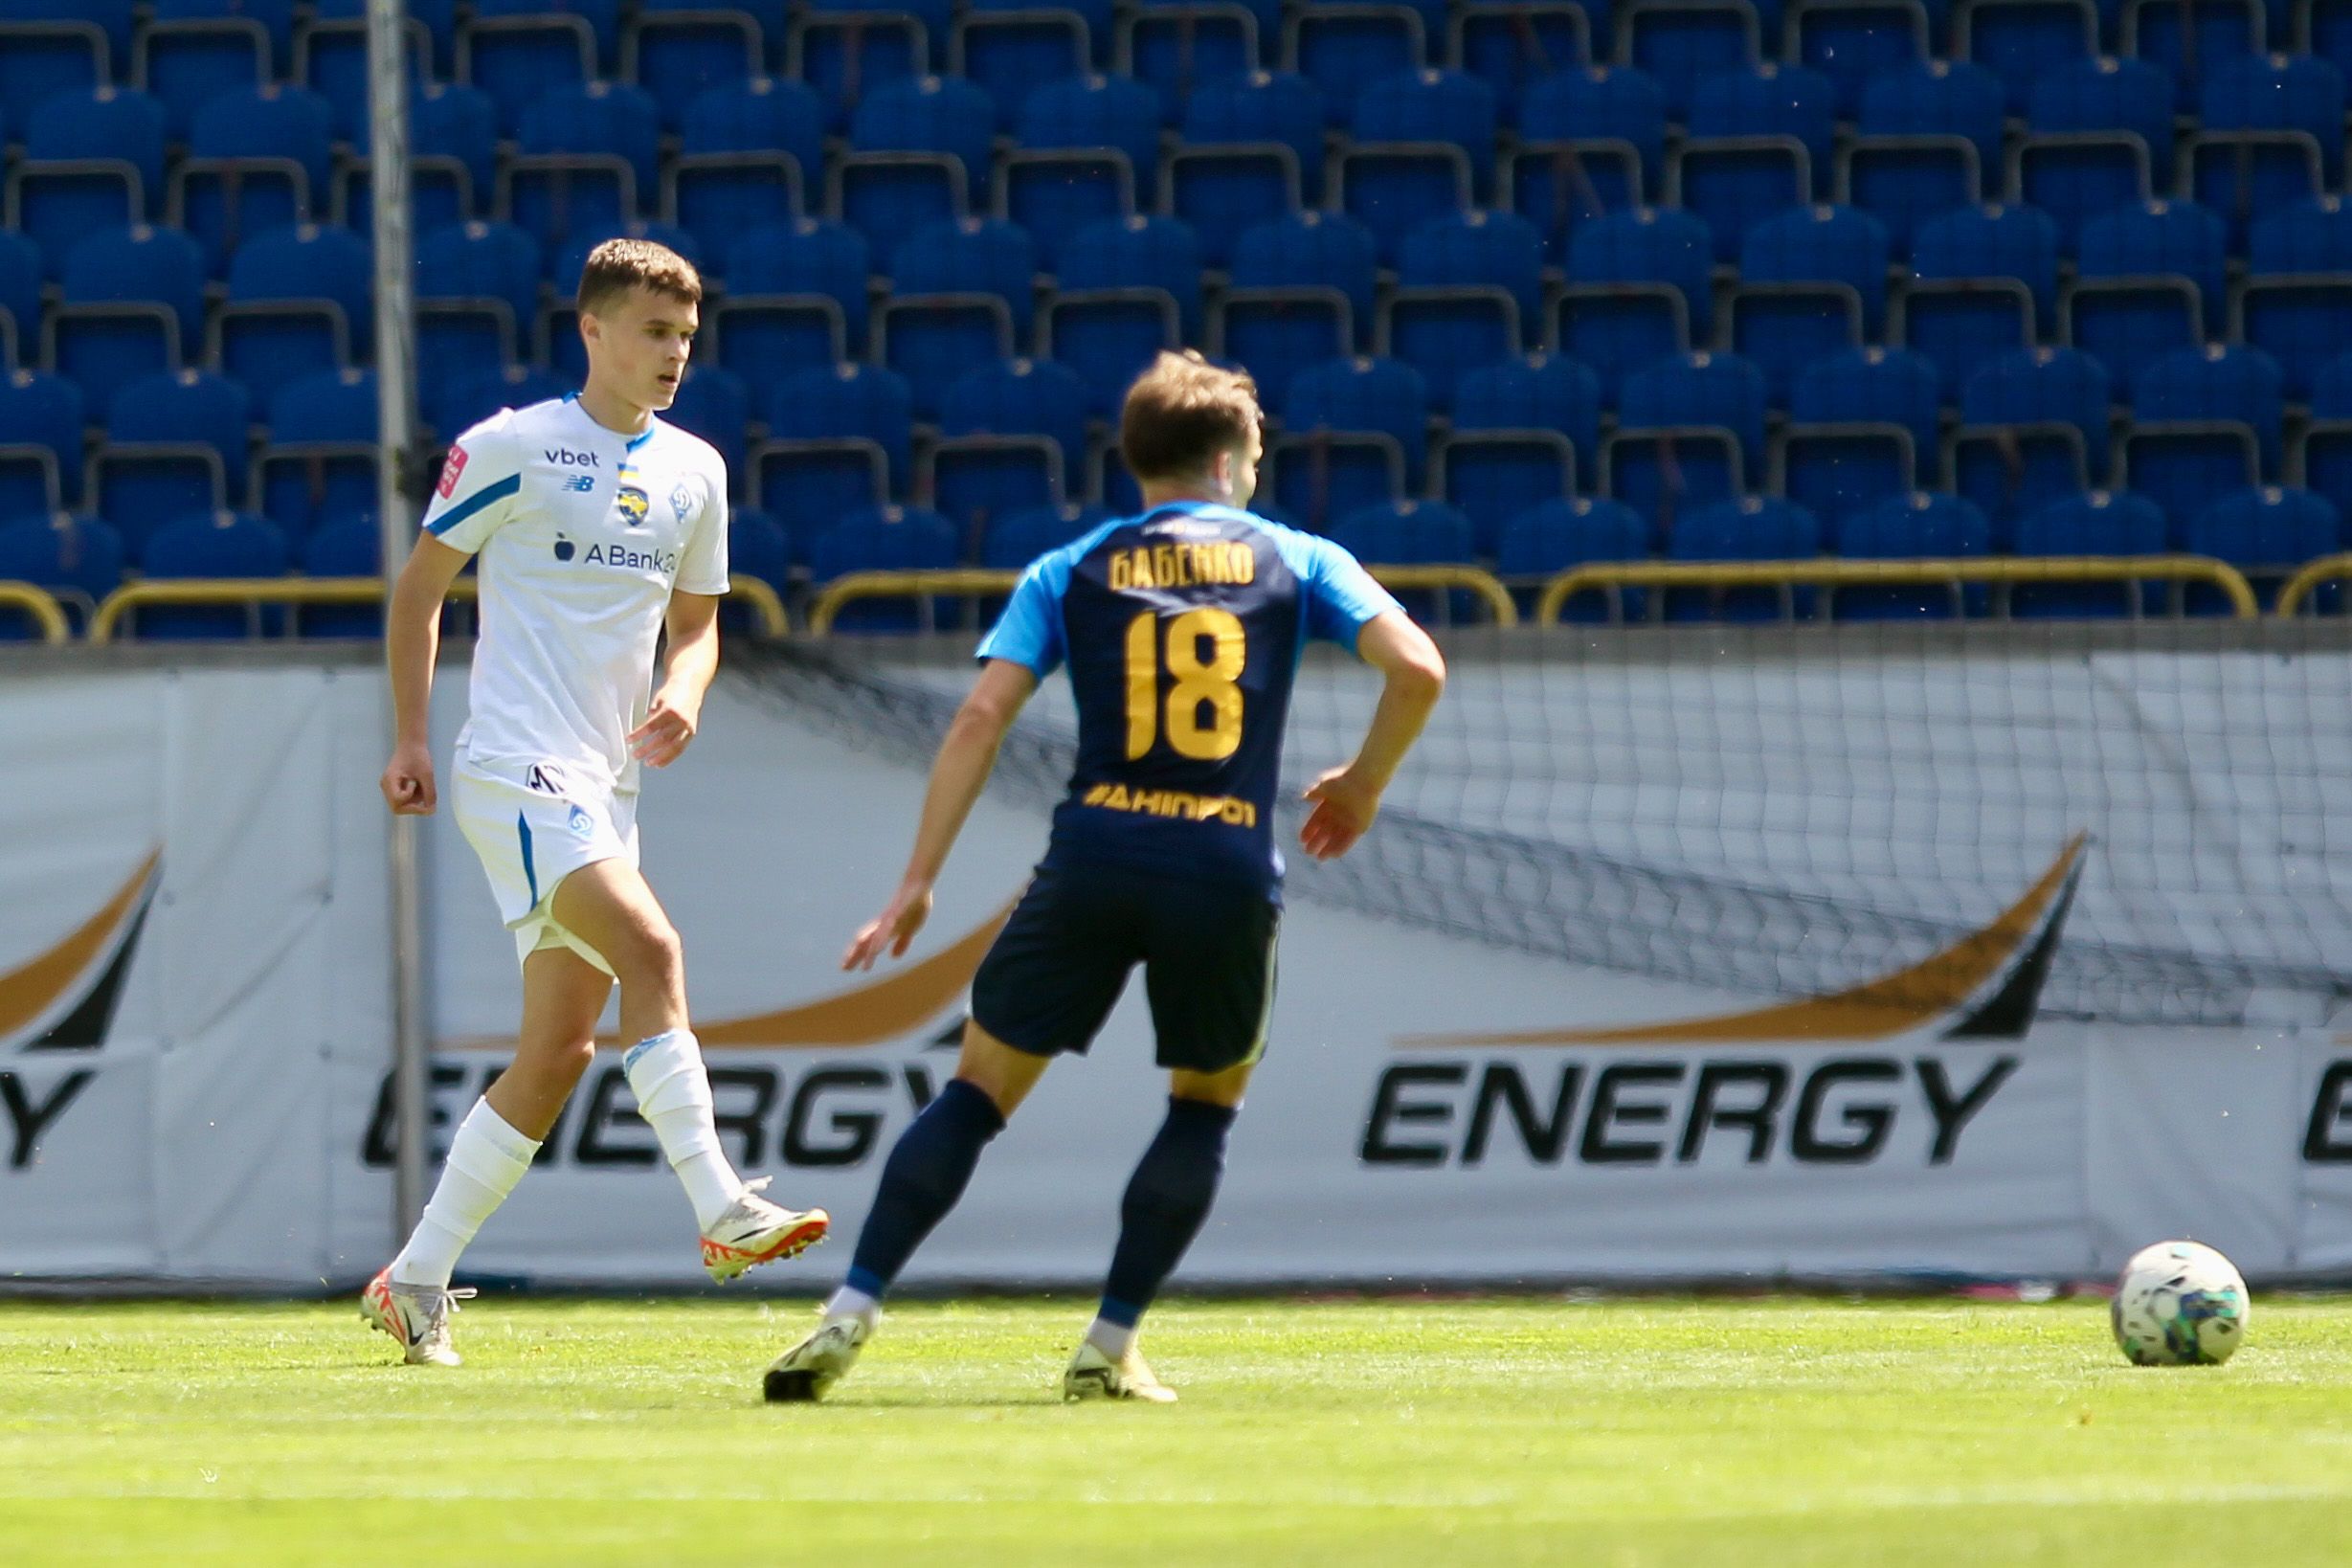 Taras Mykhavko: “We went for the second half very motivated, wanted to win”